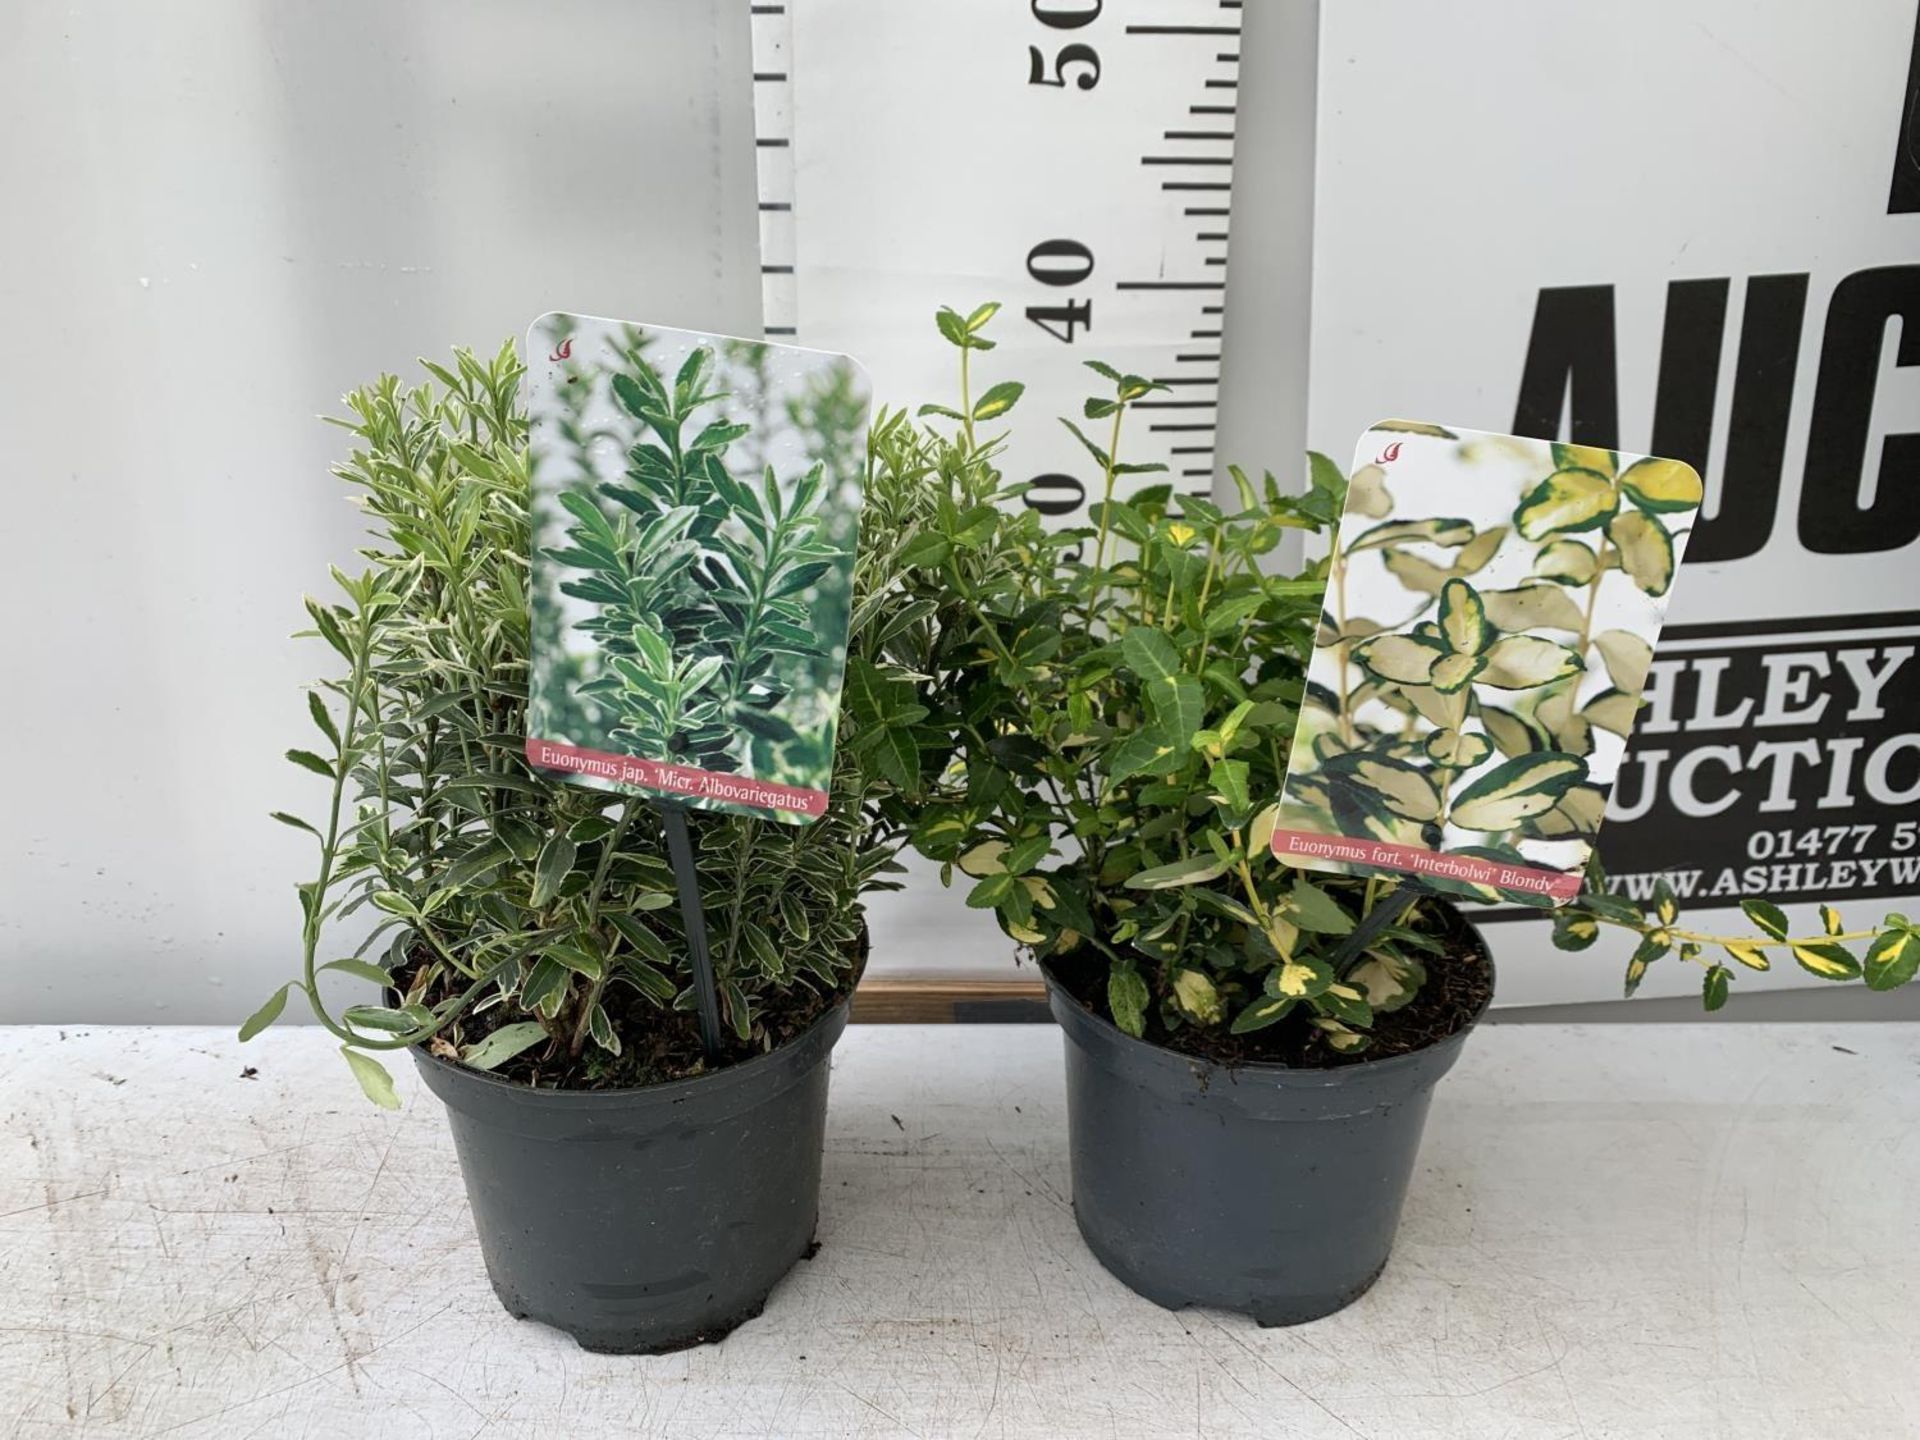 TWO EUONYMUS FORTUNA 'BLONDY' AND JAPONICA 'MICR ALBOVARIEGATUS' IN TWO LTR POTS HEIGHT 35CM PLUS